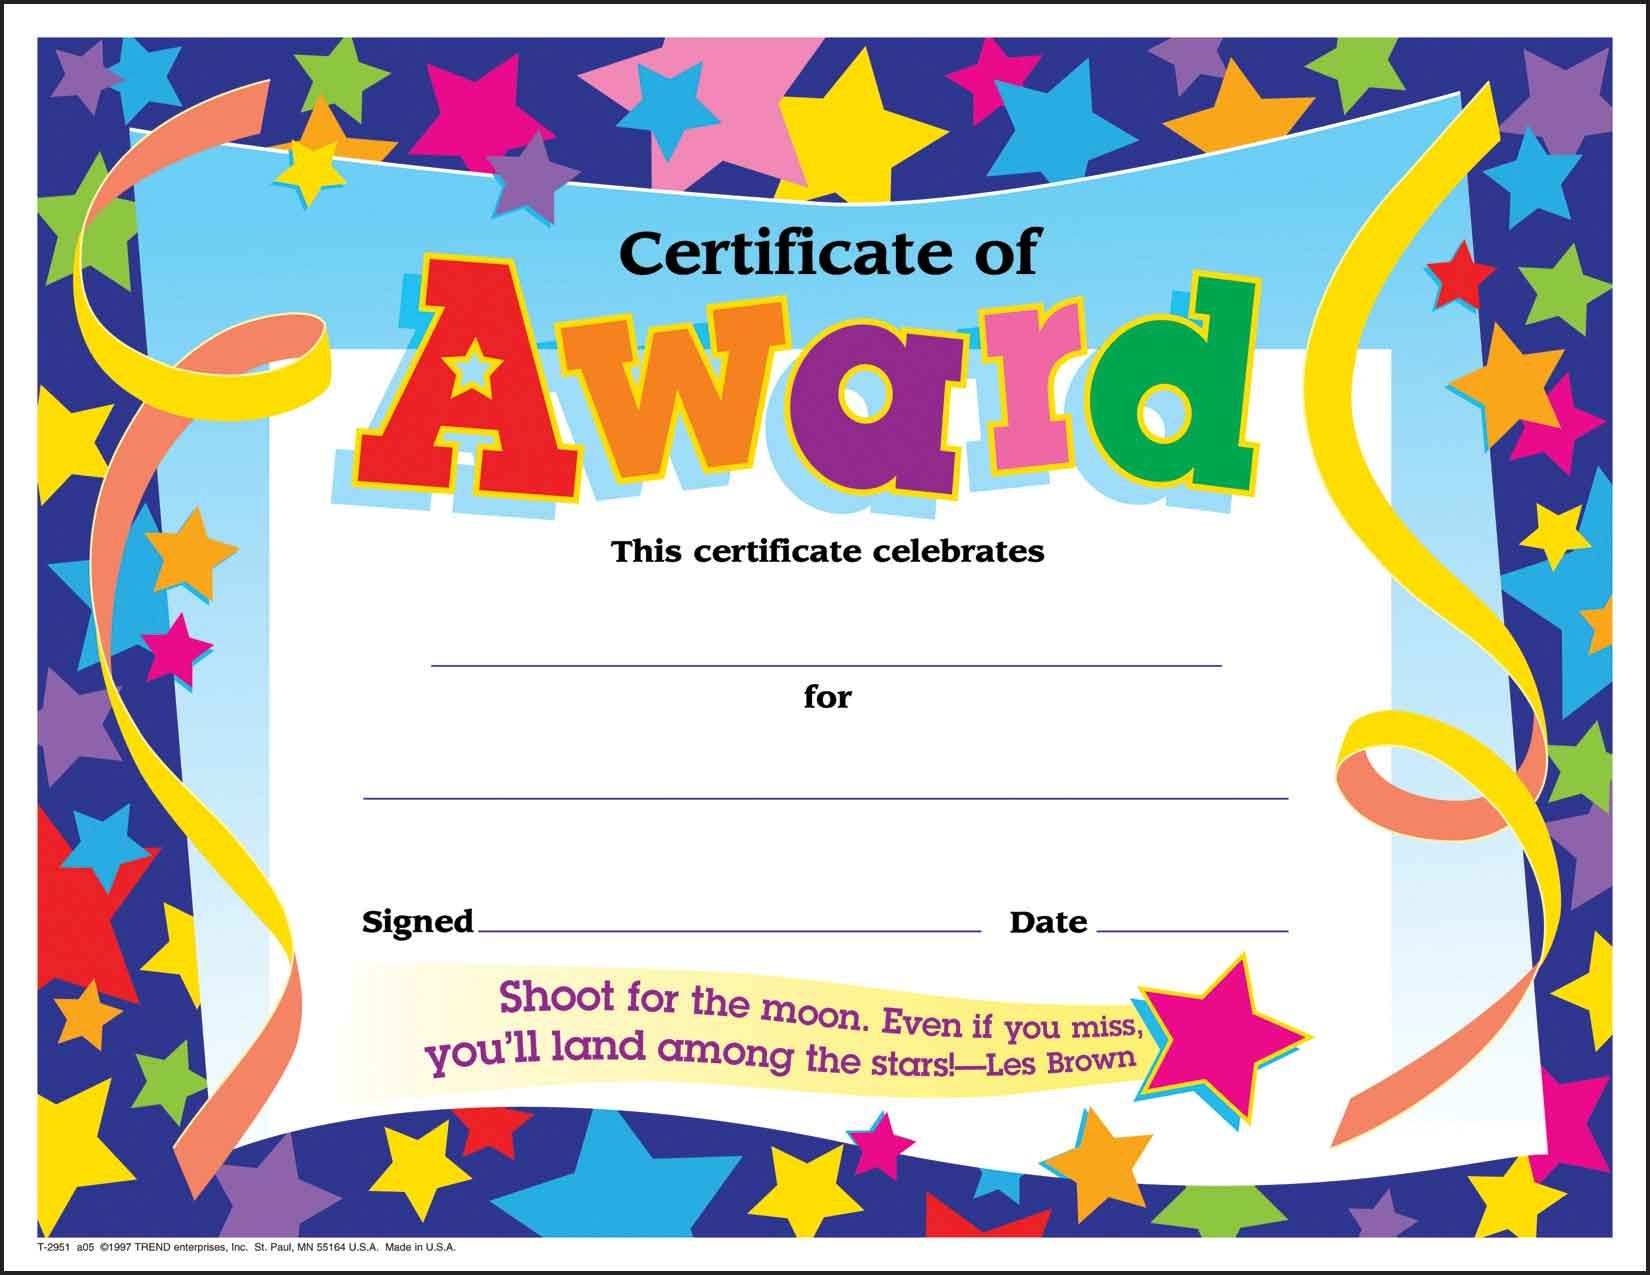 Certificate Template For Kids Free Certificate Templates For Free School Certificate Templates